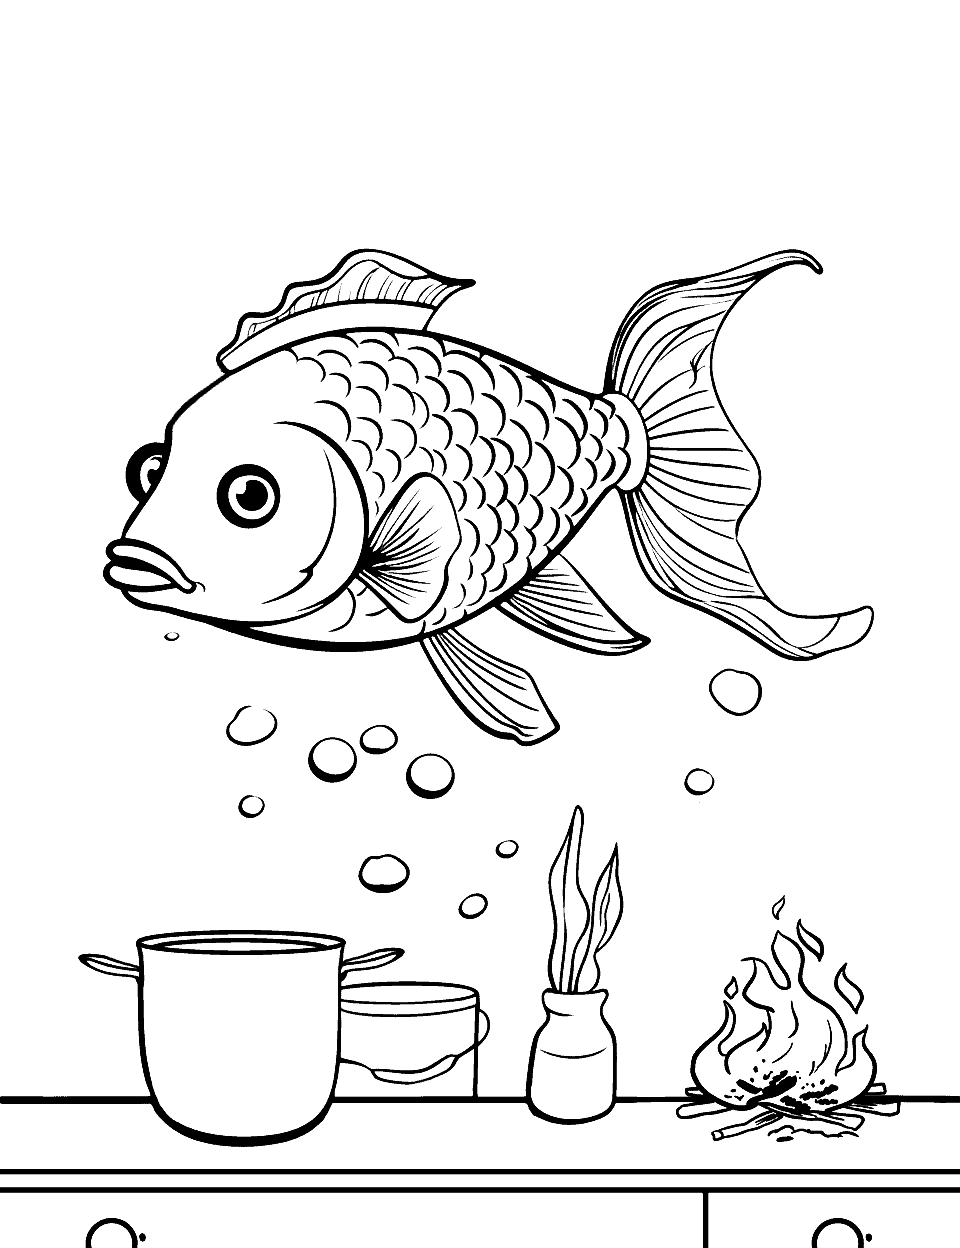 Fish Cooking Delicious Food Coloring Page - Fish in an underwater kitchen prepping to cook some food.